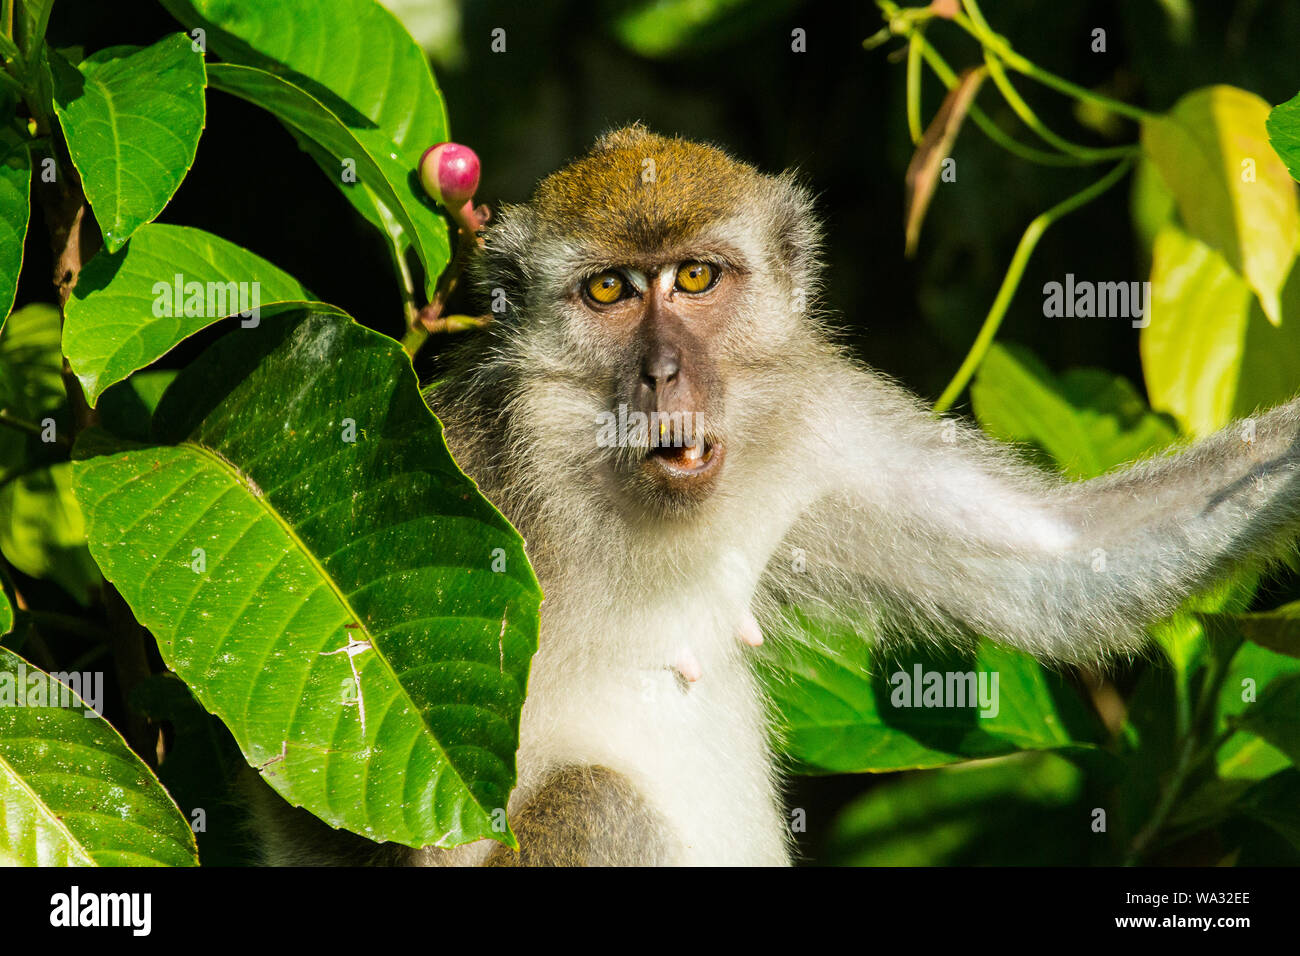 A pig tailed macaque peers out from the foliage next to the Kinabatangan river, Sabah, Borneo Stock Photo